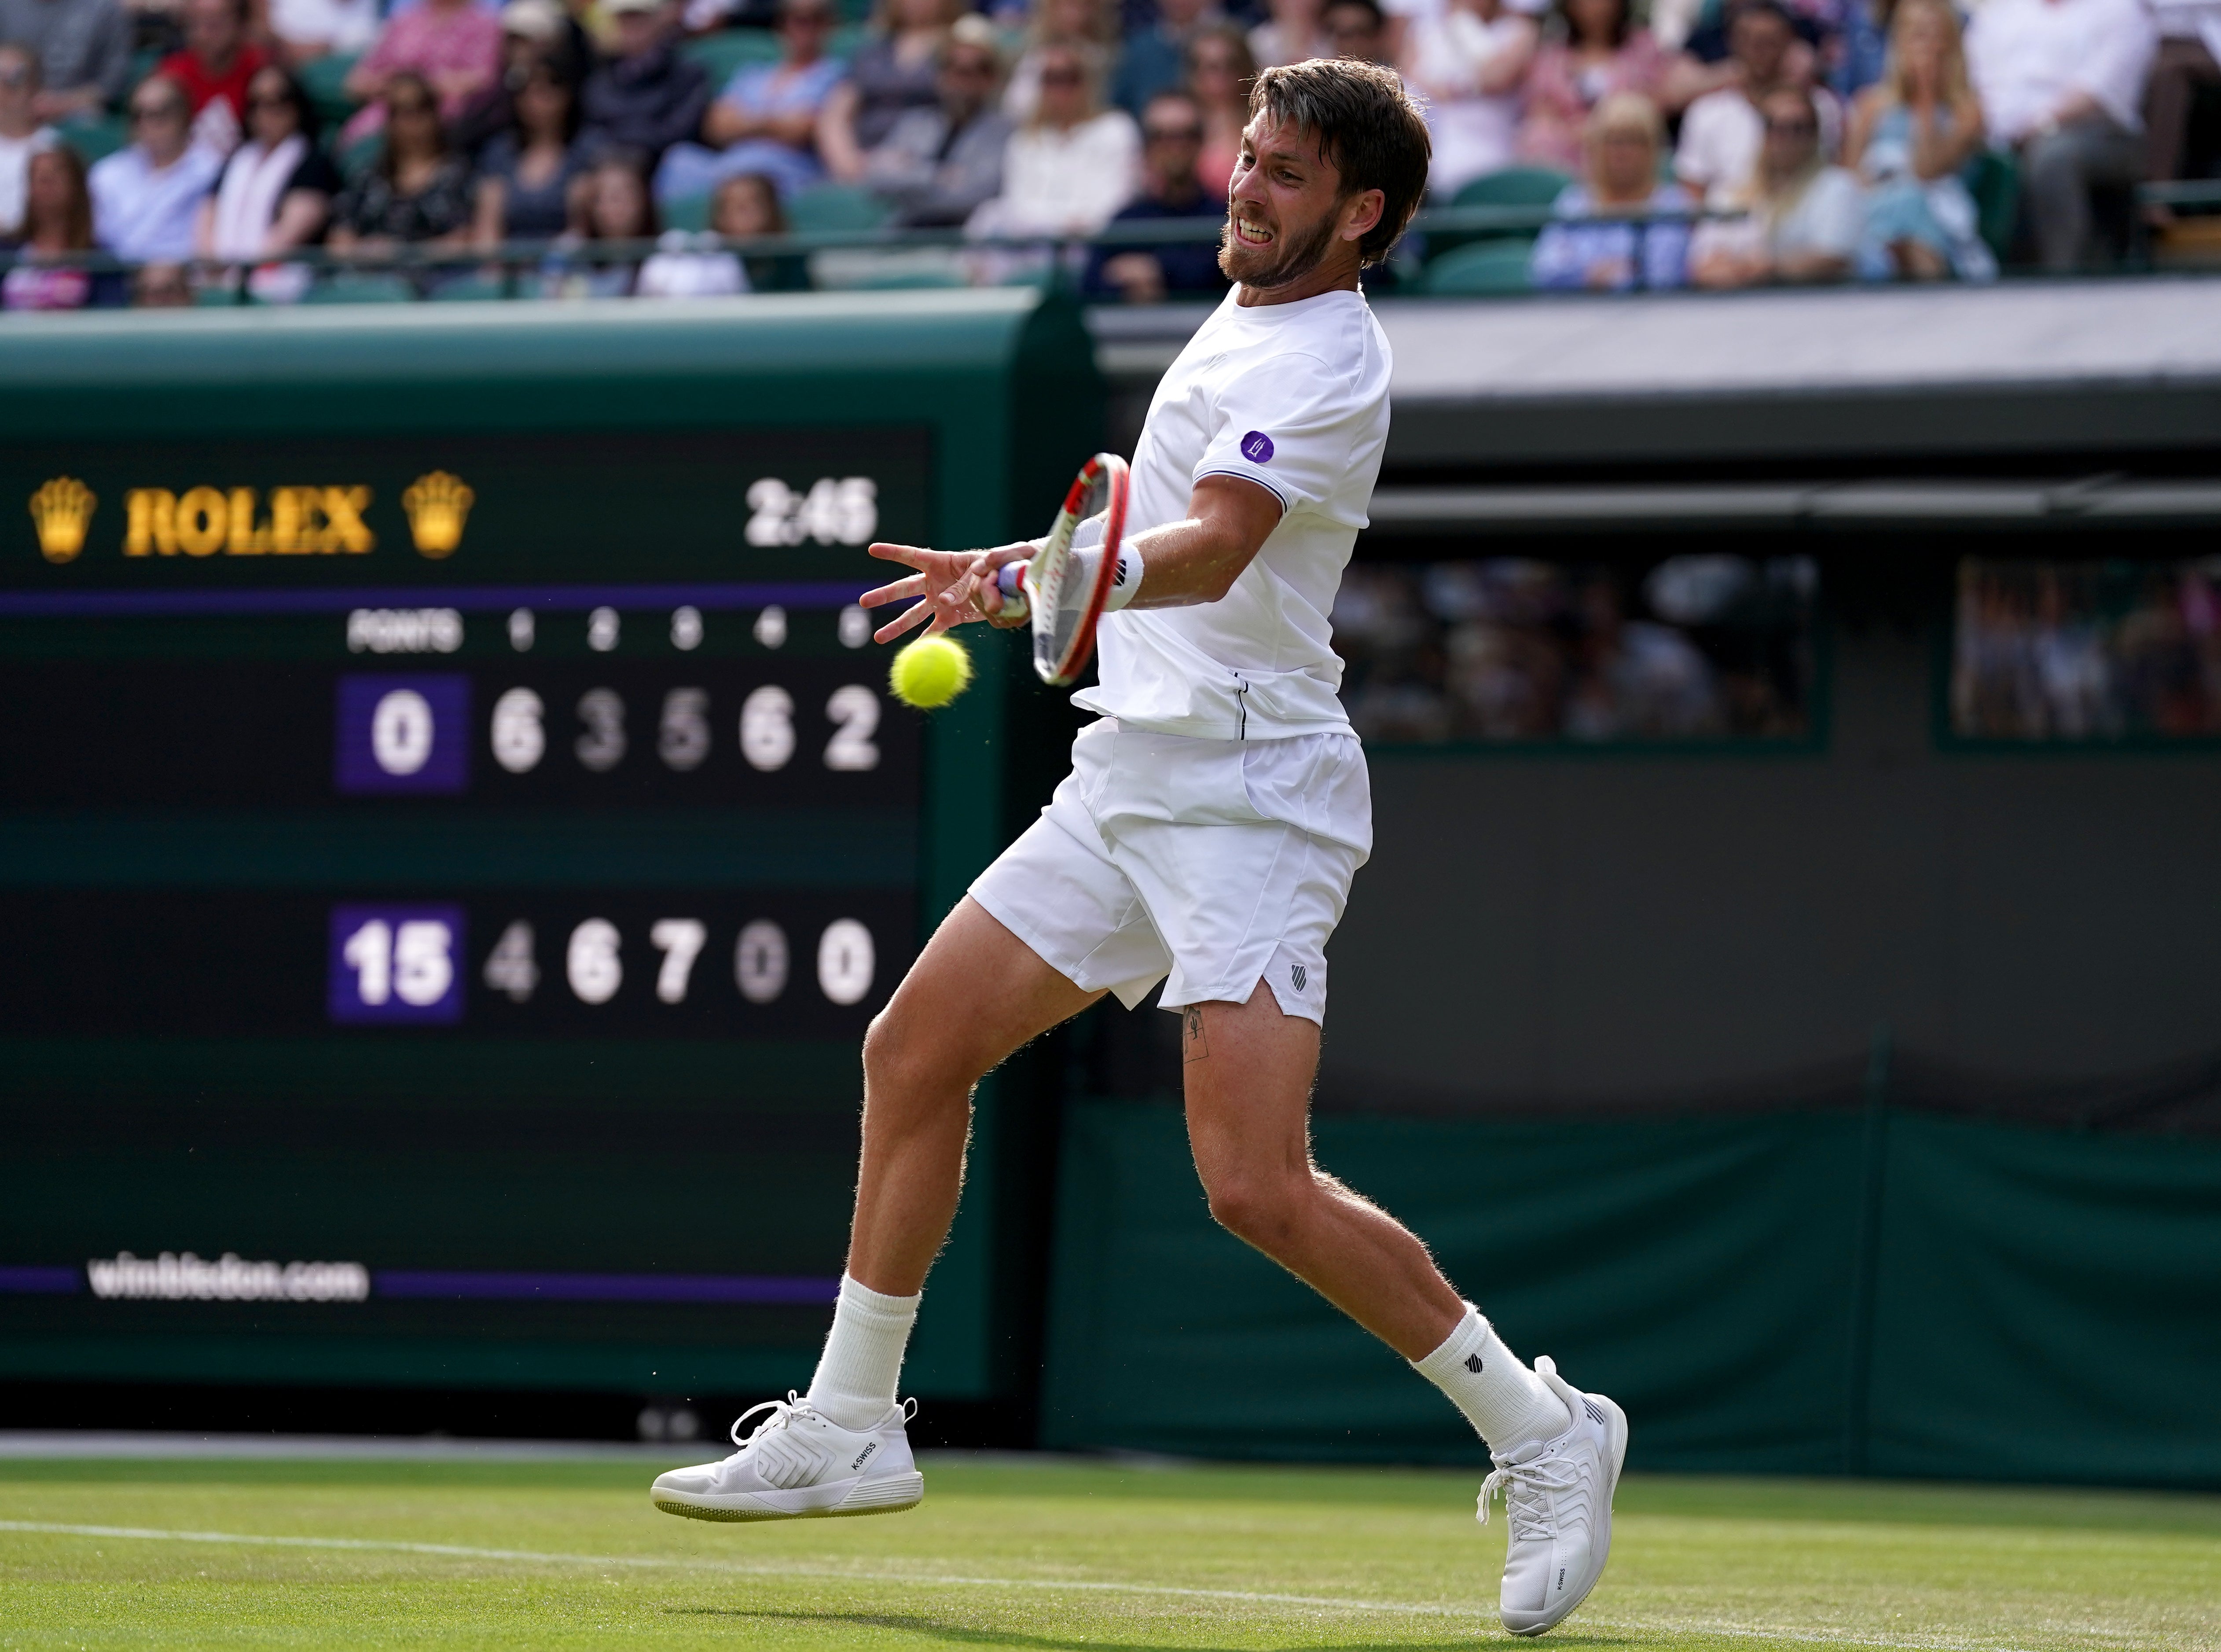 Cameron Norrie had to fight back to reach the third round (Adam Davy/PA)